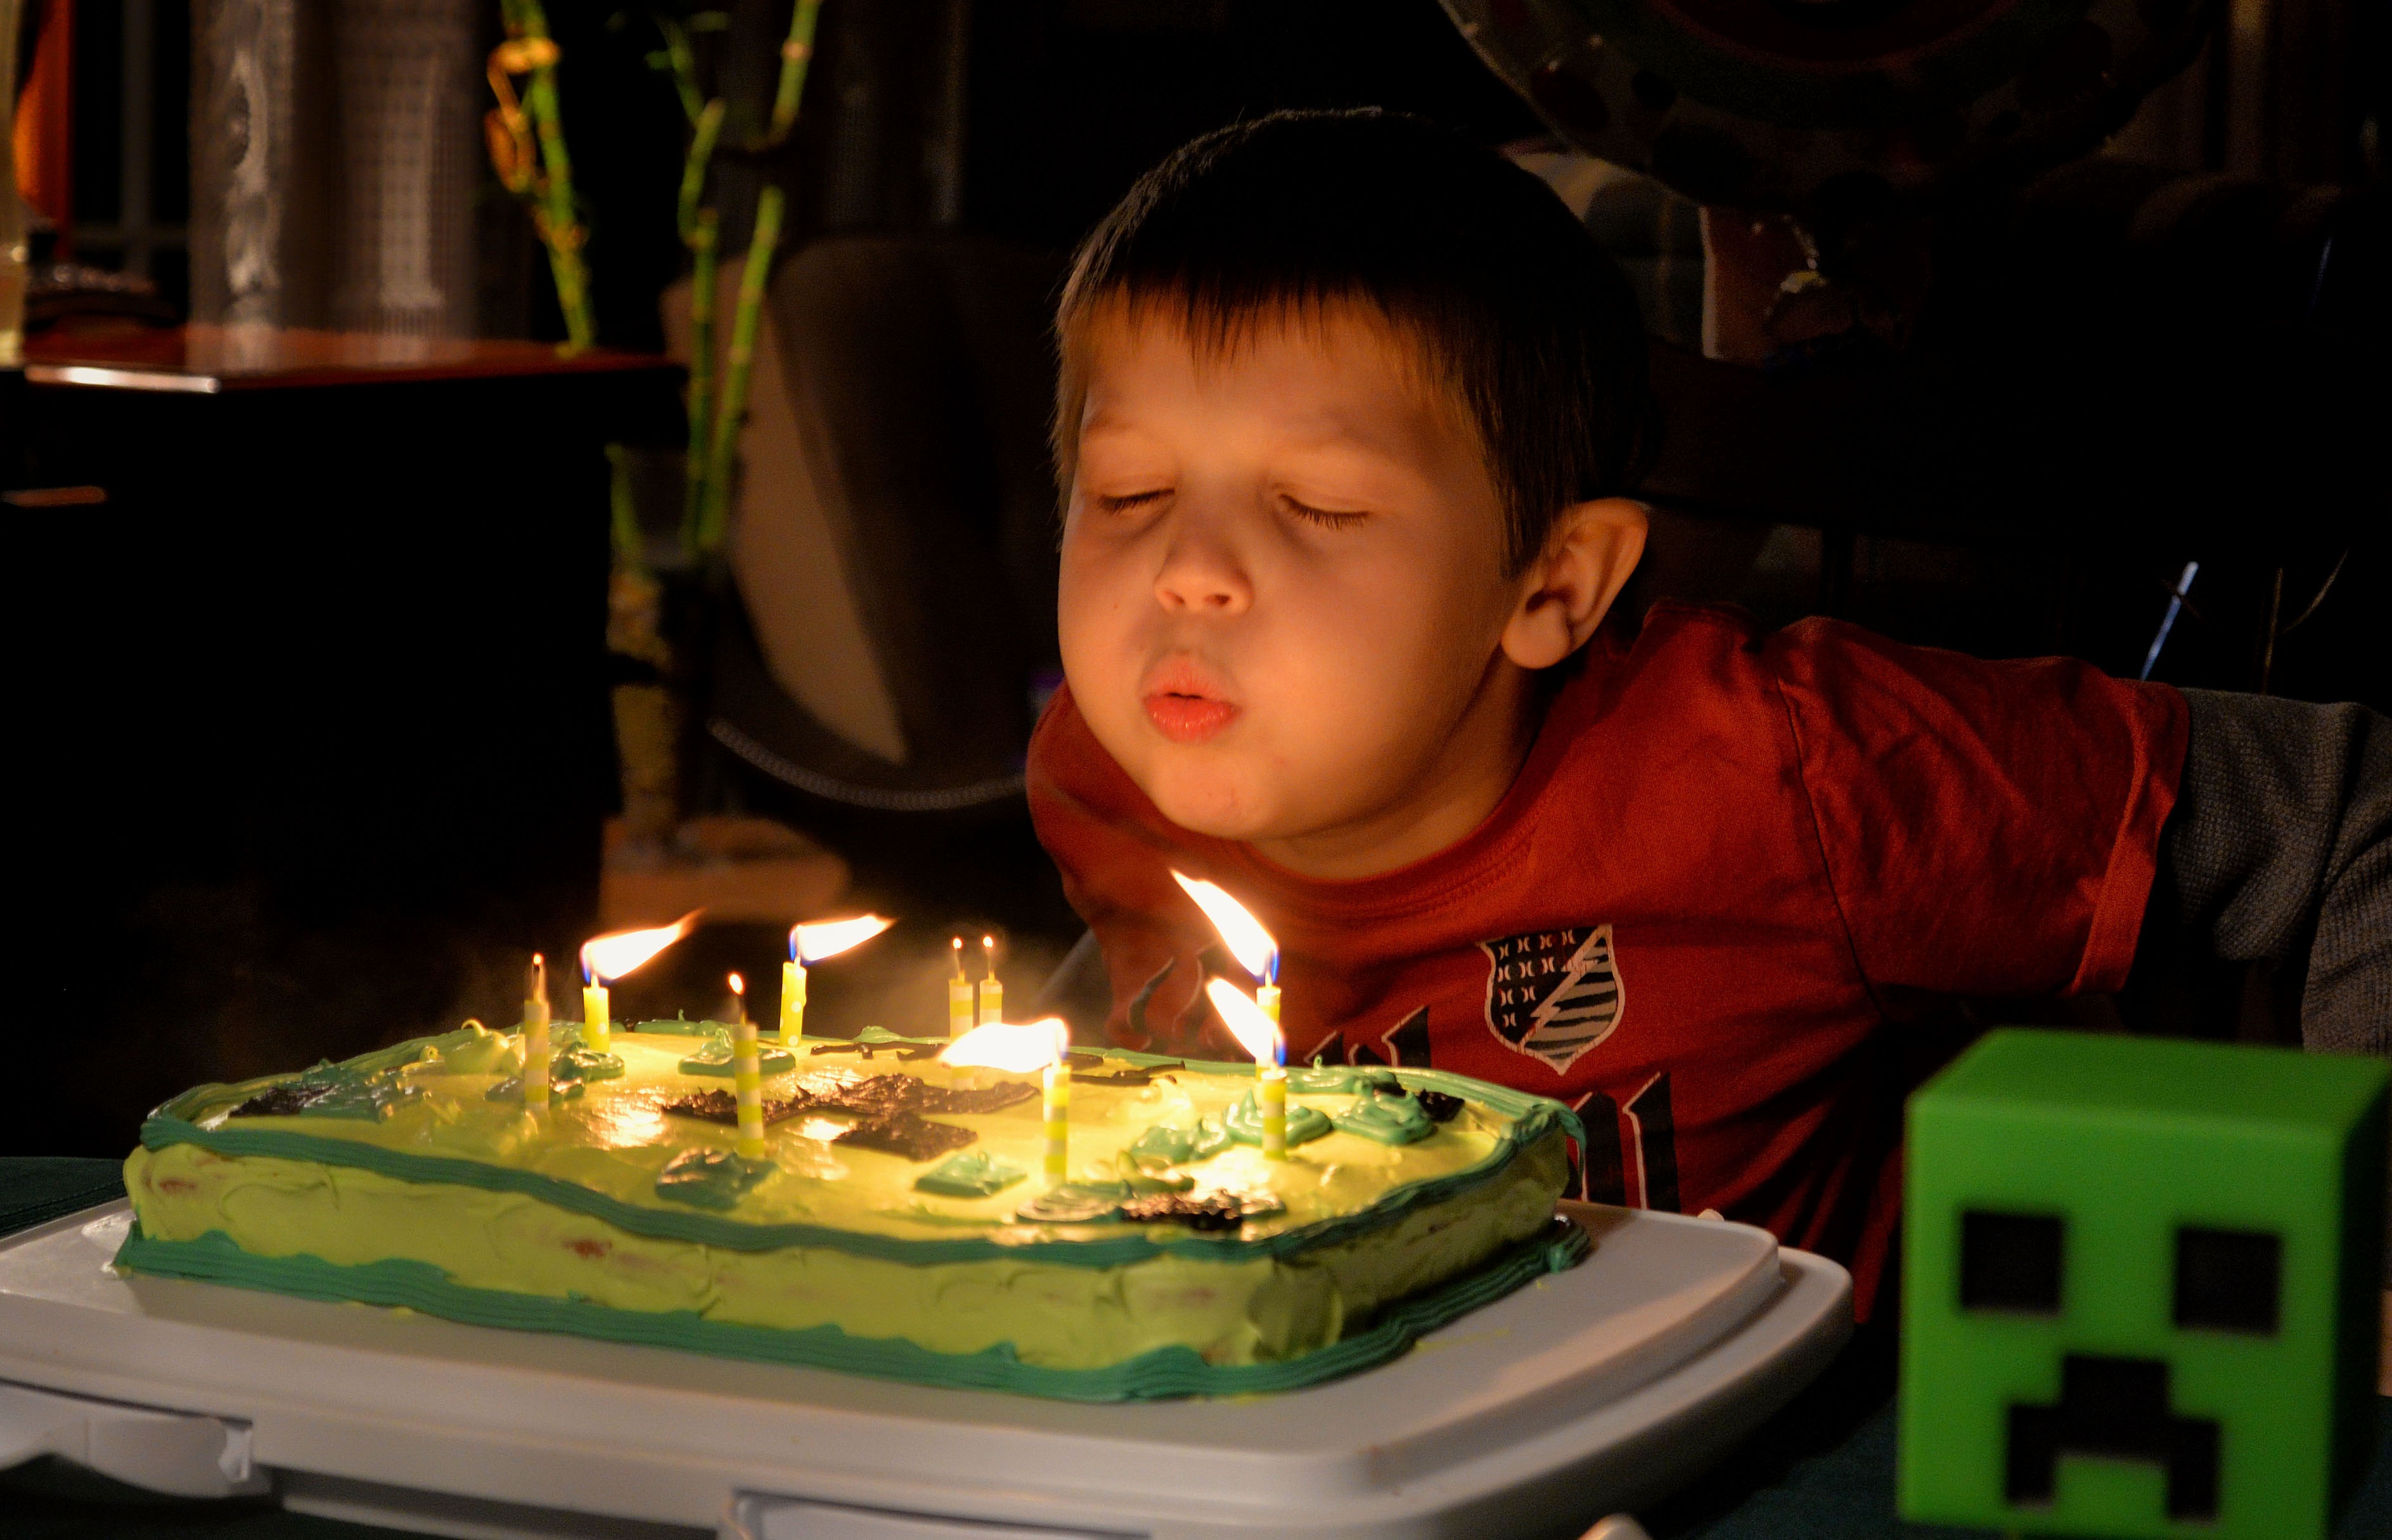 Boy blowing out candles on cake.